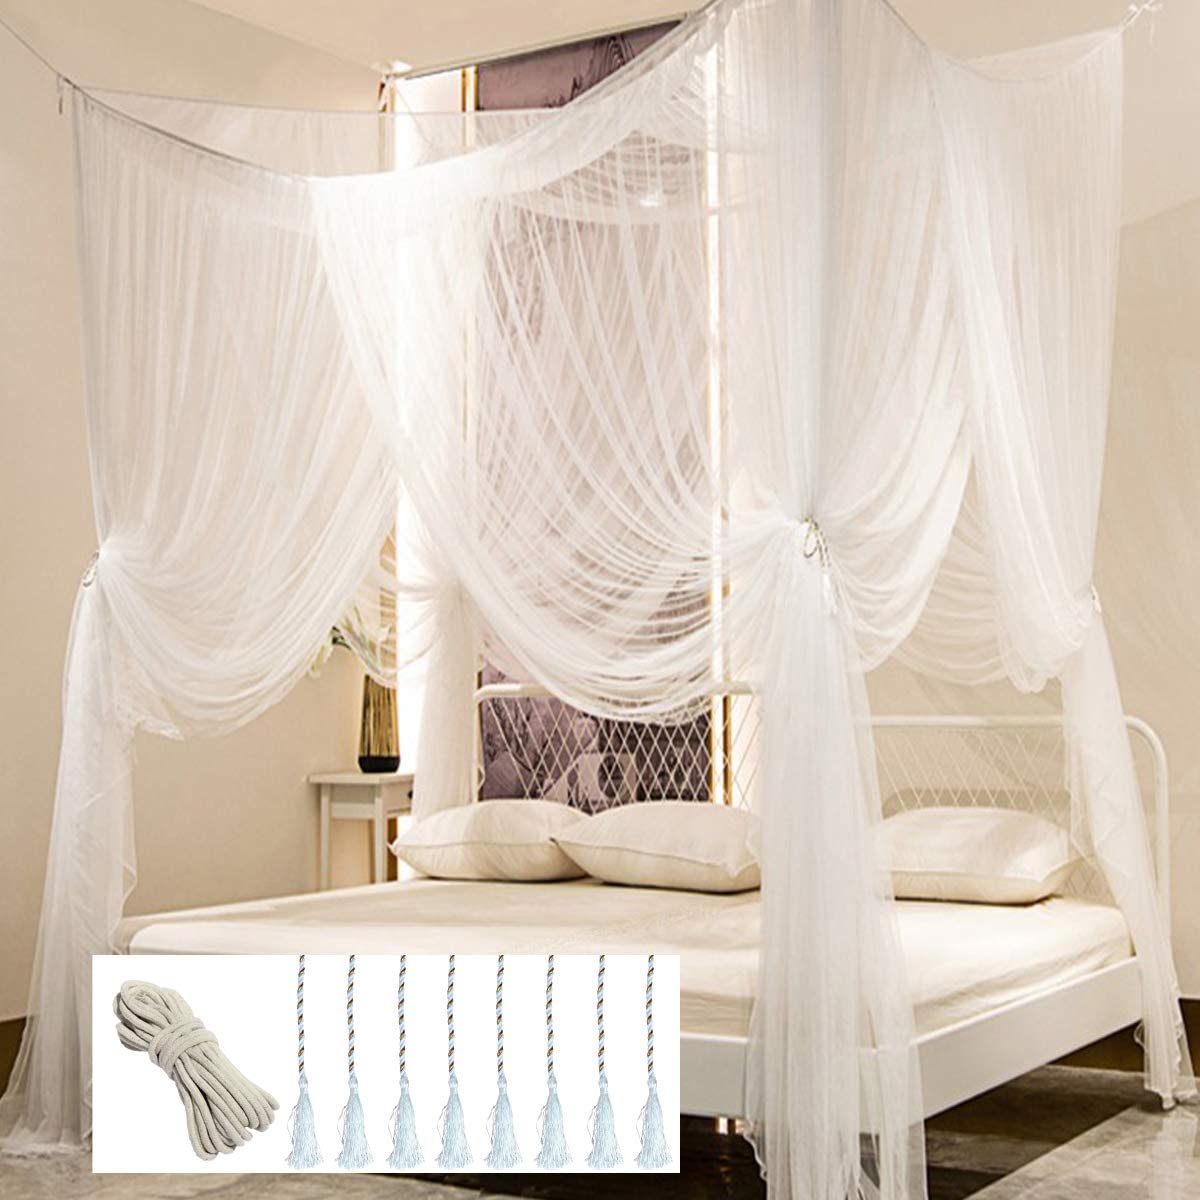 Mosquito Net for Bed Ultra Large Hanging Bed Canopy with 100 led String Lights 